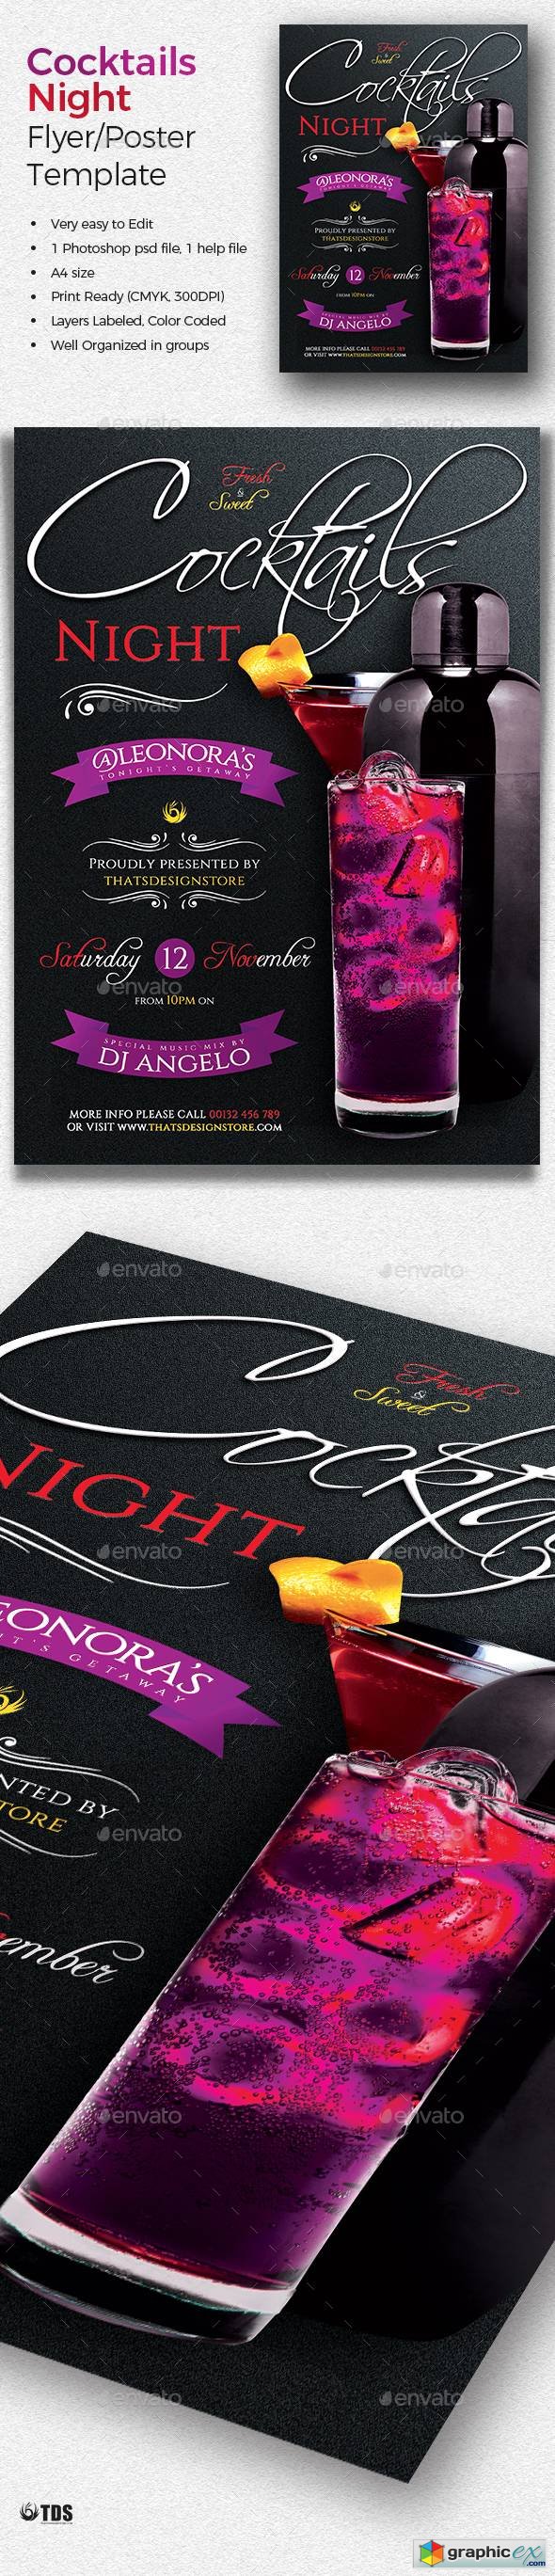 Cocktails Night Flyer Template